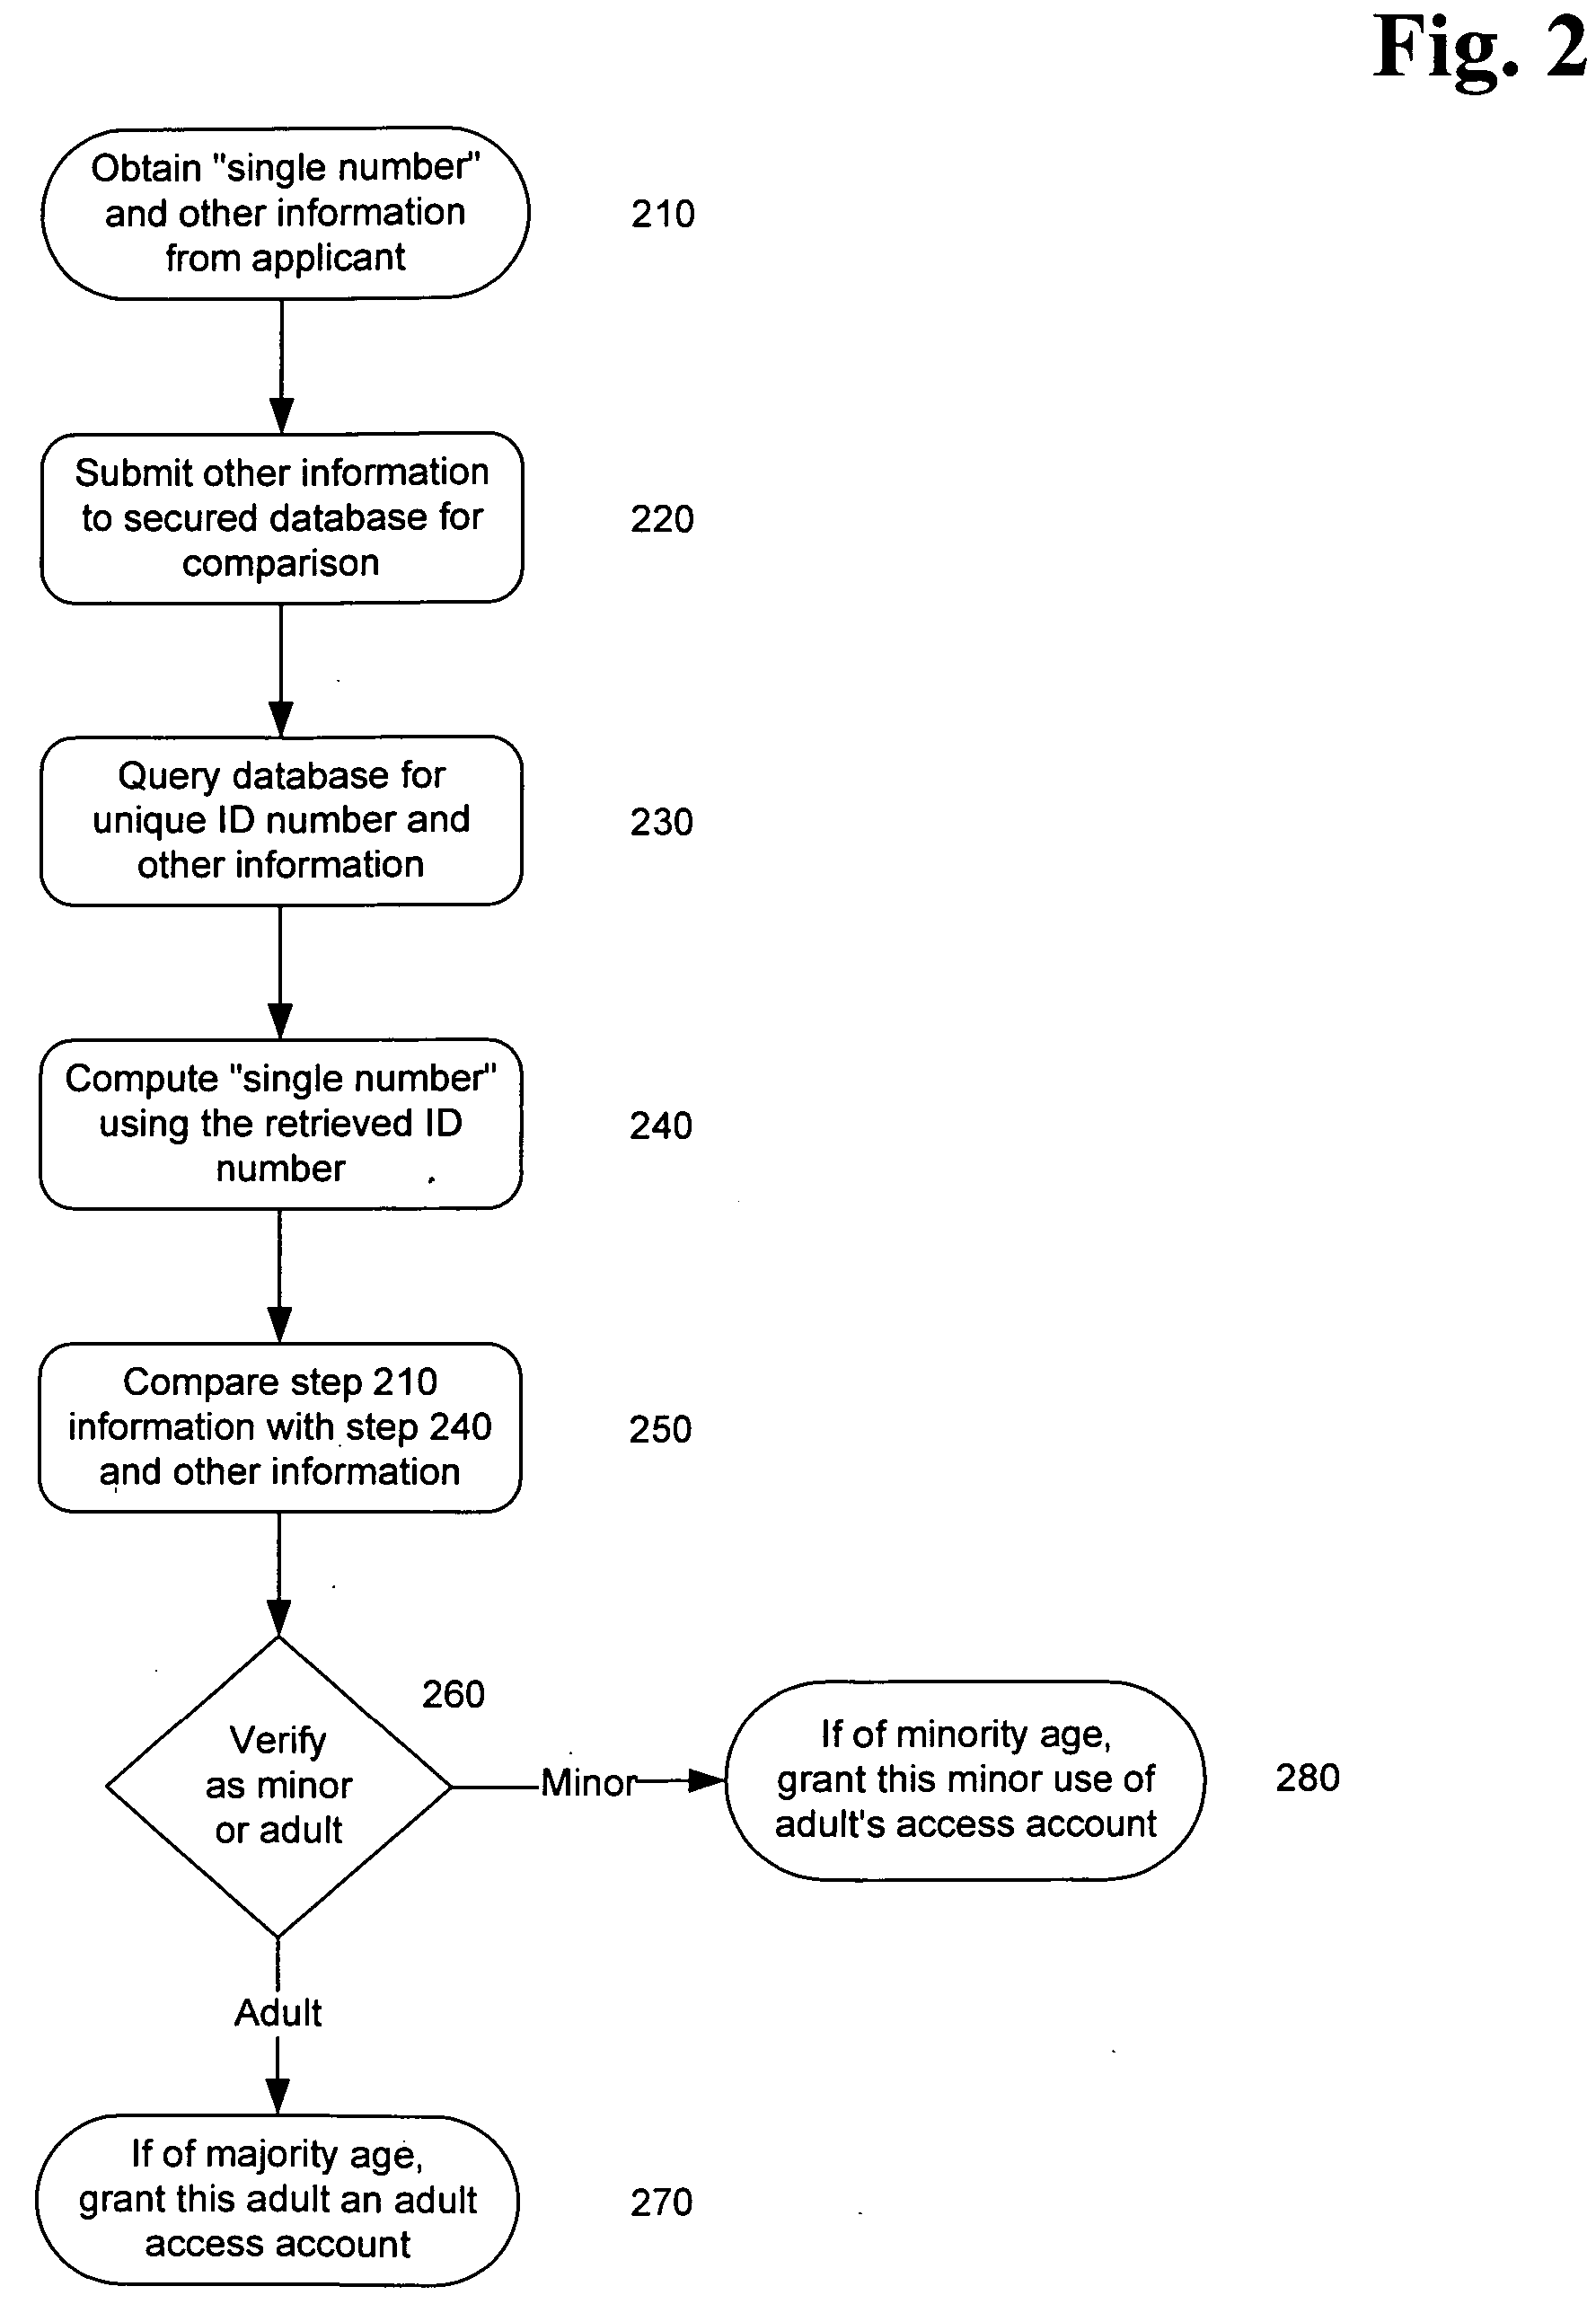 System and method for verifying the age and identity of individuals and limiting their access to appropriate material